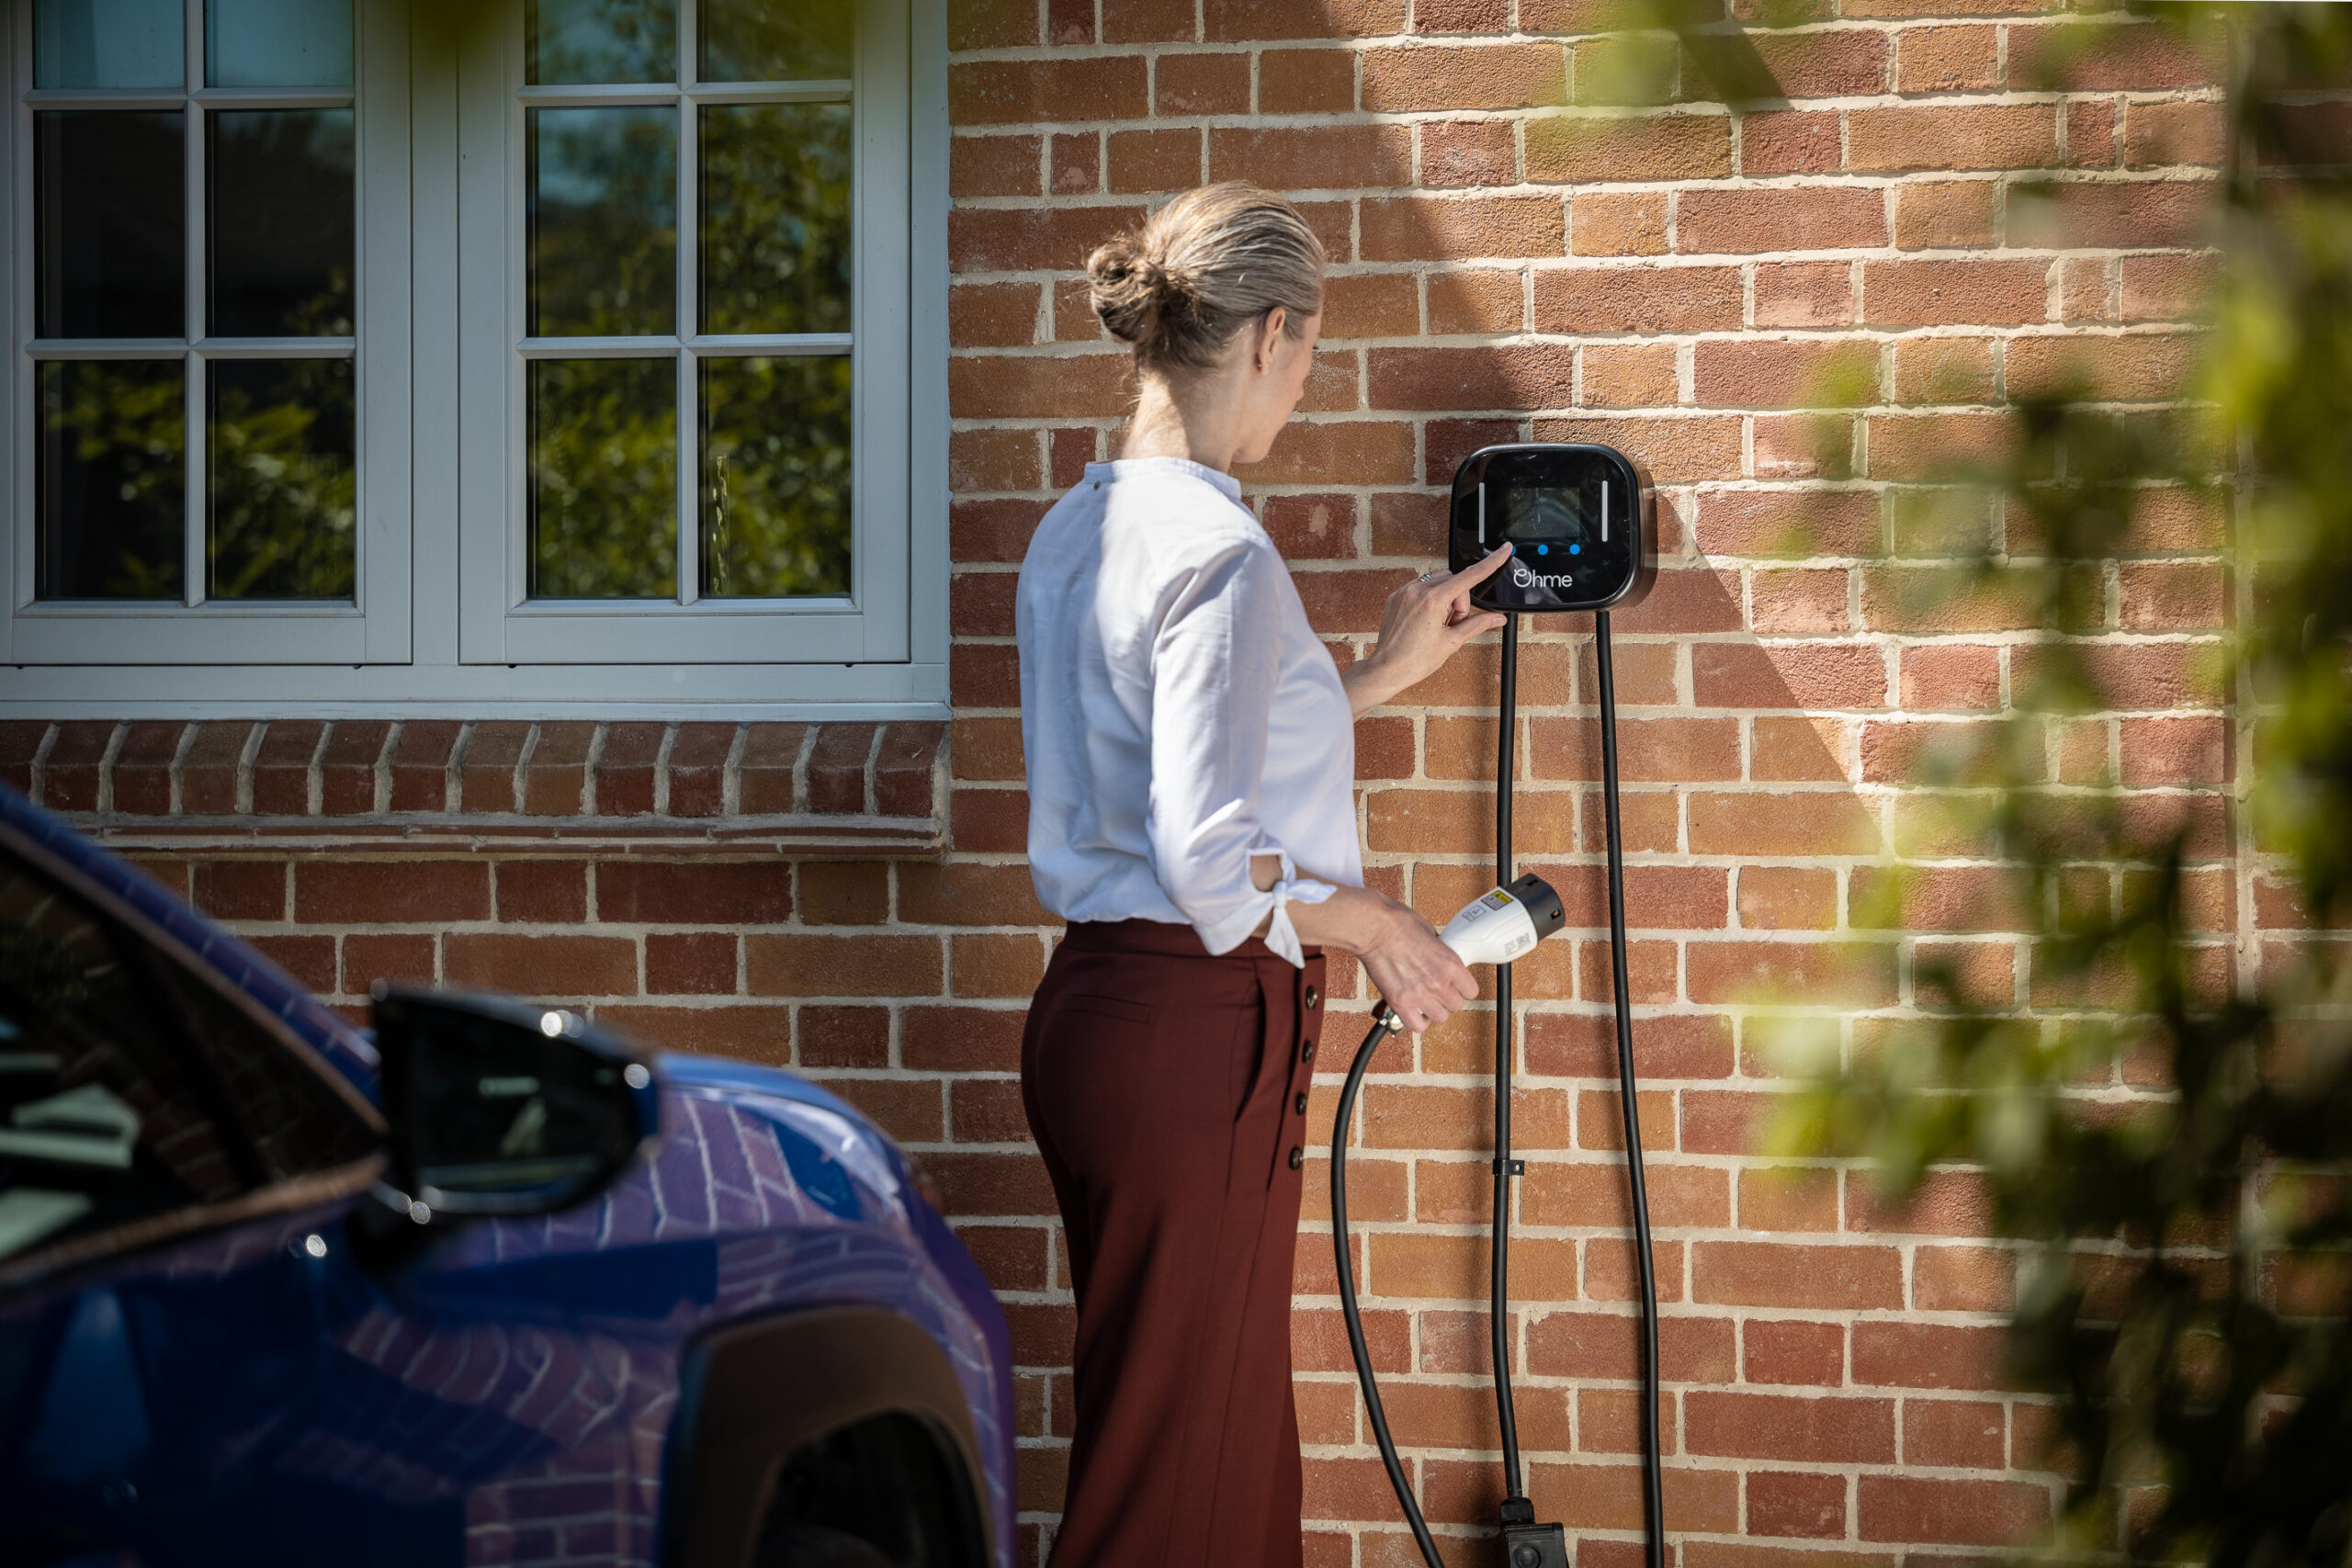 Lady using EV charger to plug in blue electric car